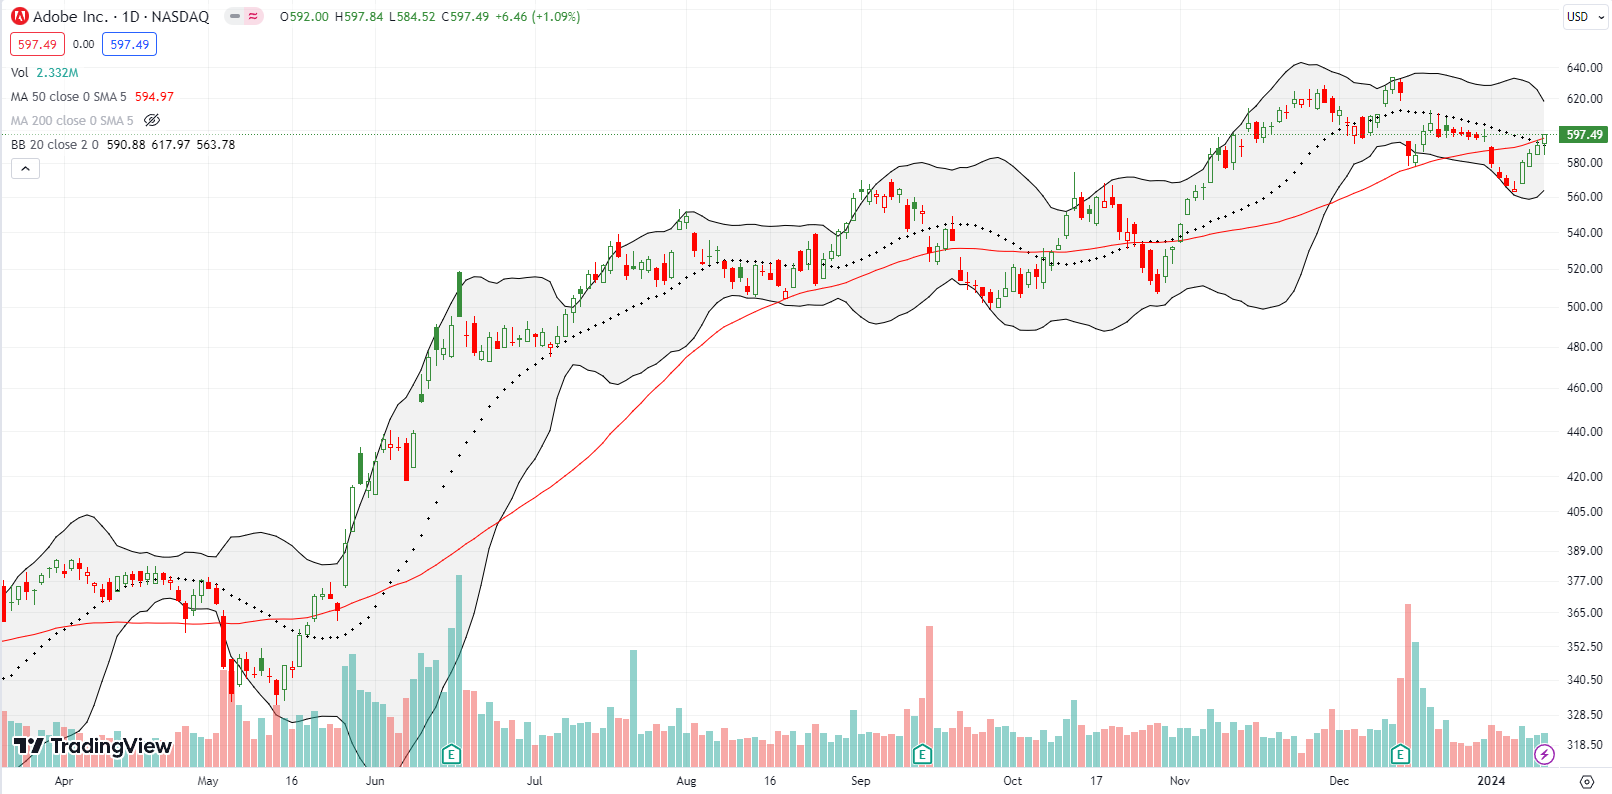 Adobe Inc (ADBE) punched through converged resistance at its 20 and 50DMA resistance.